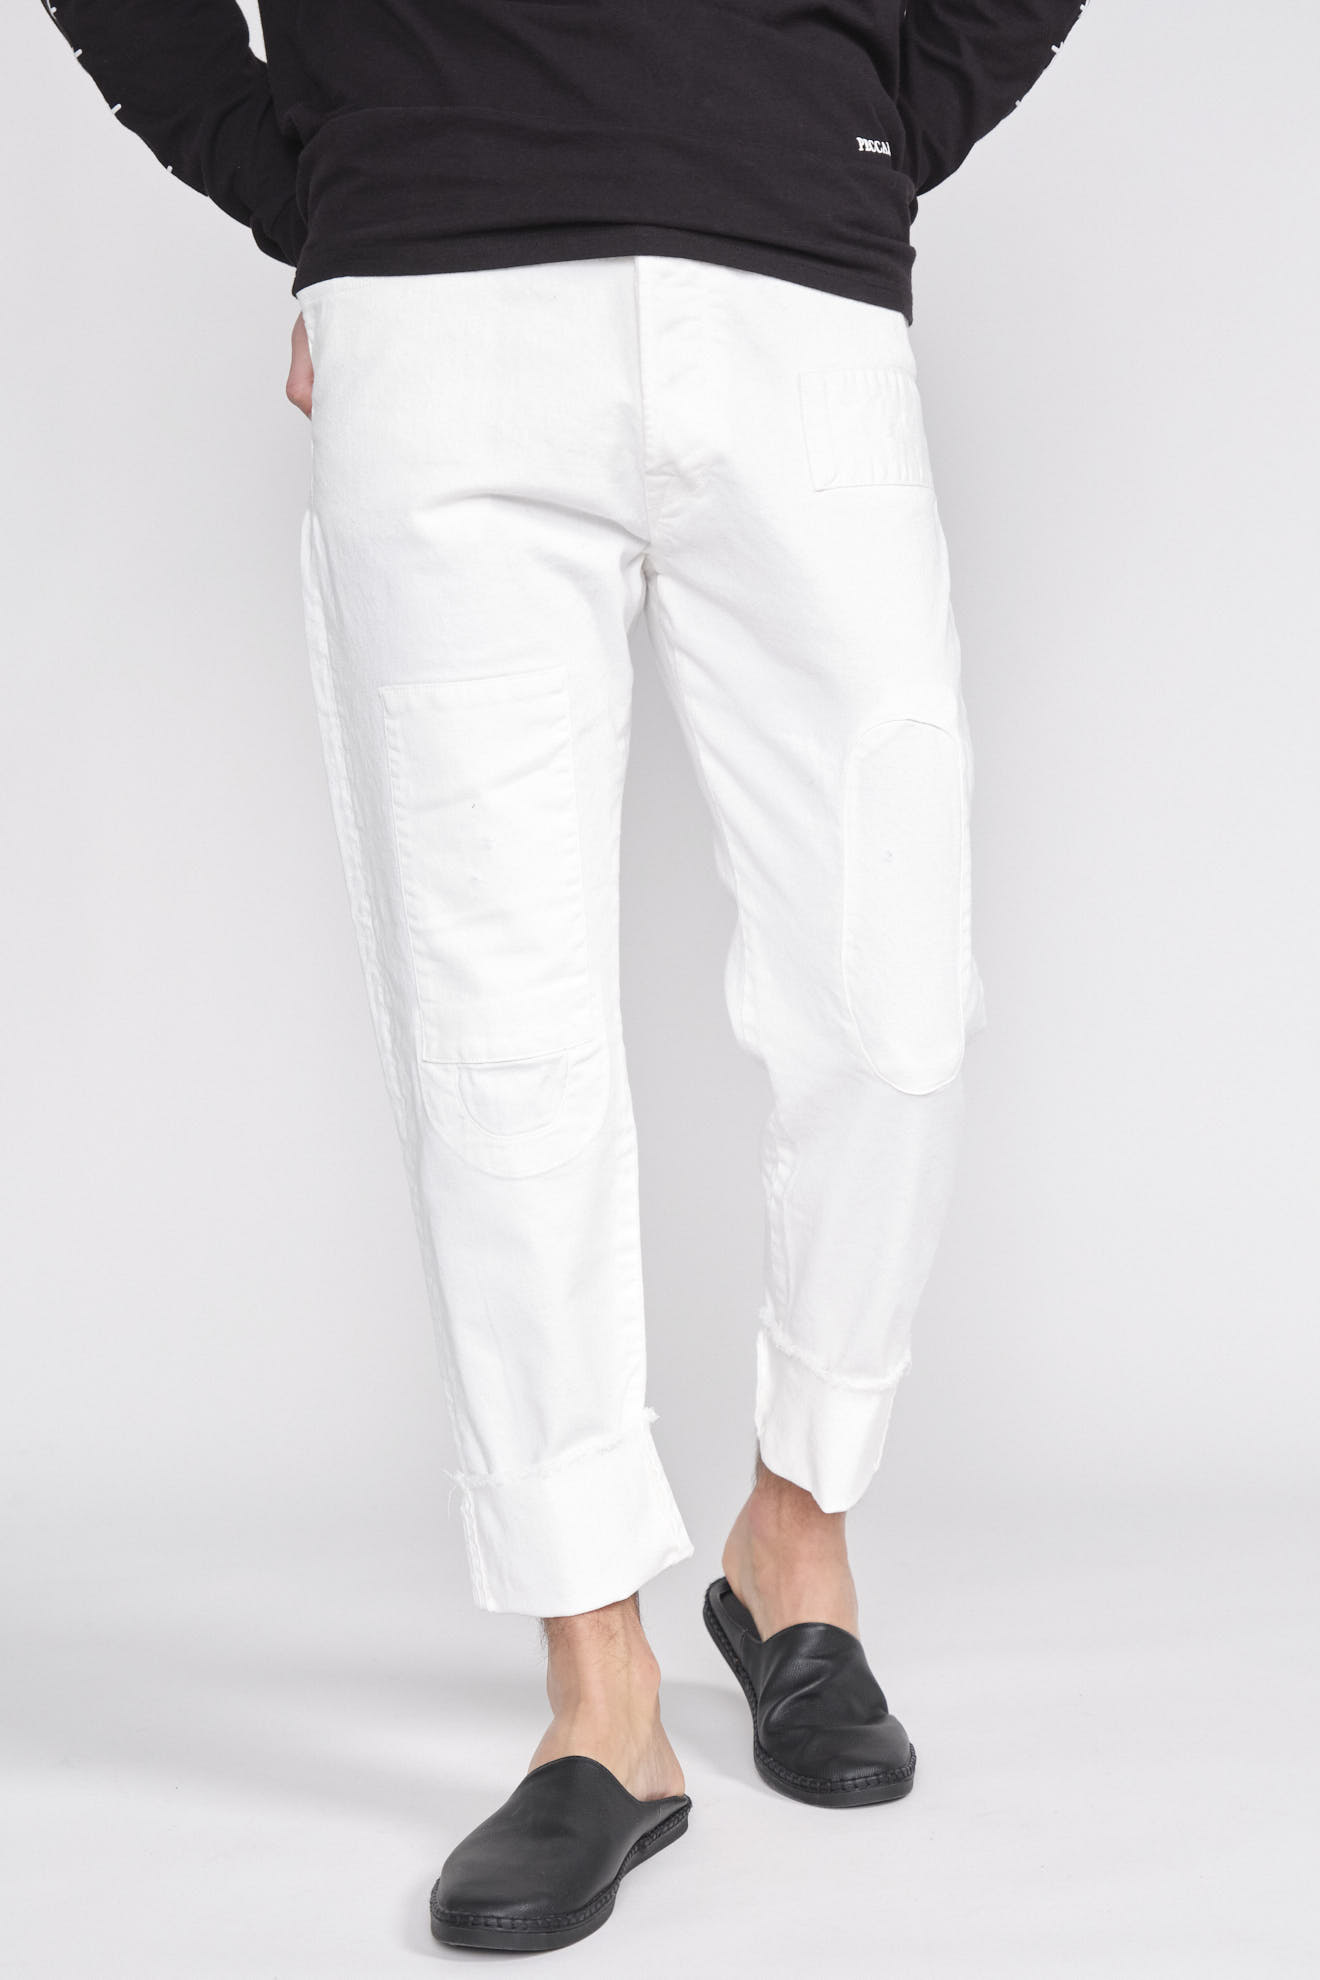 maurizio massimino Jose - denim jeans with patch patches white 50